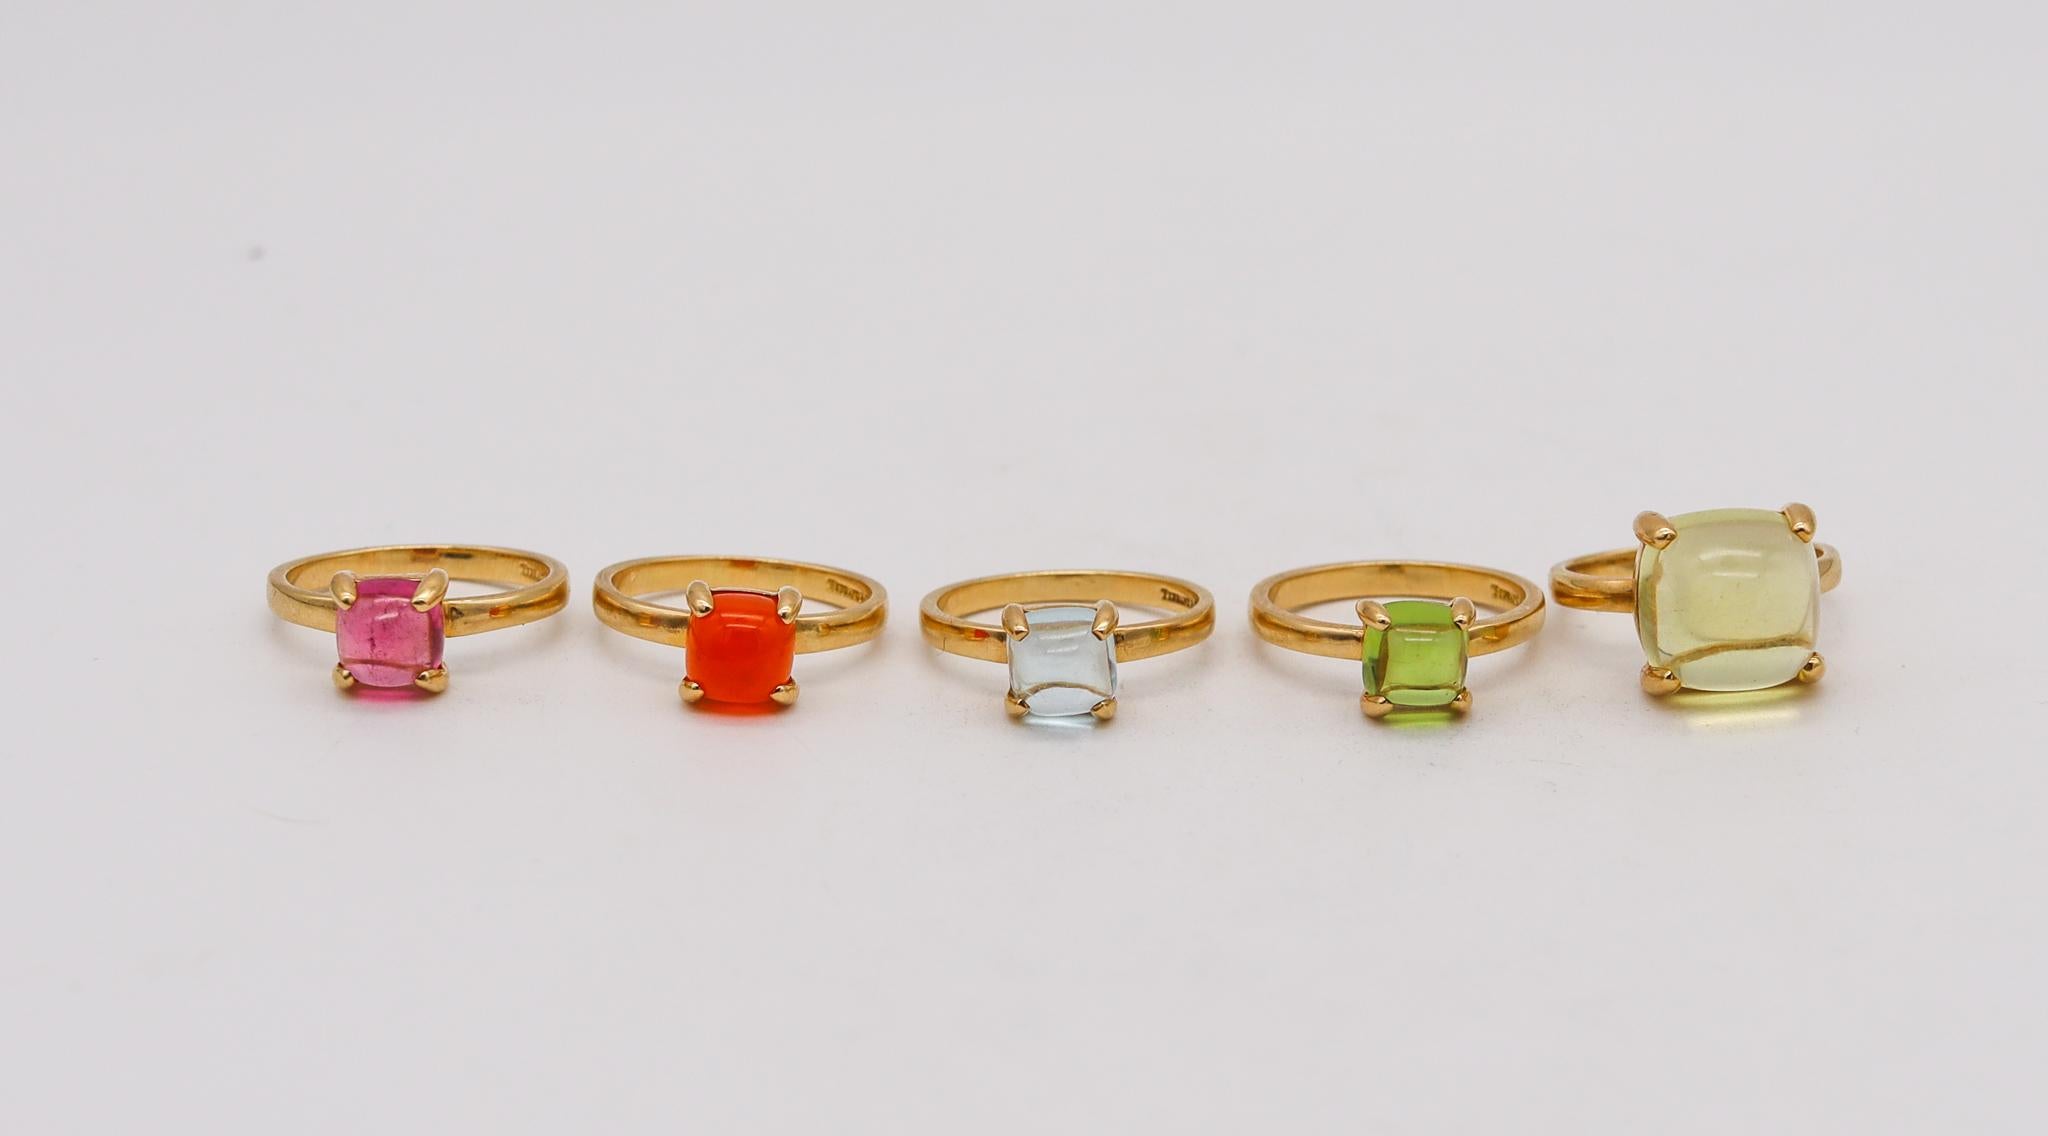 Suite of five stack rings designed by Paloma Picasso for Tiffany & Co.

Beautiful suite of five stackable sugar rings, created in New York city by Paloma Picasso for the Tiffany & Co. Studios back in the late 1980's. Each ring has been crafted in